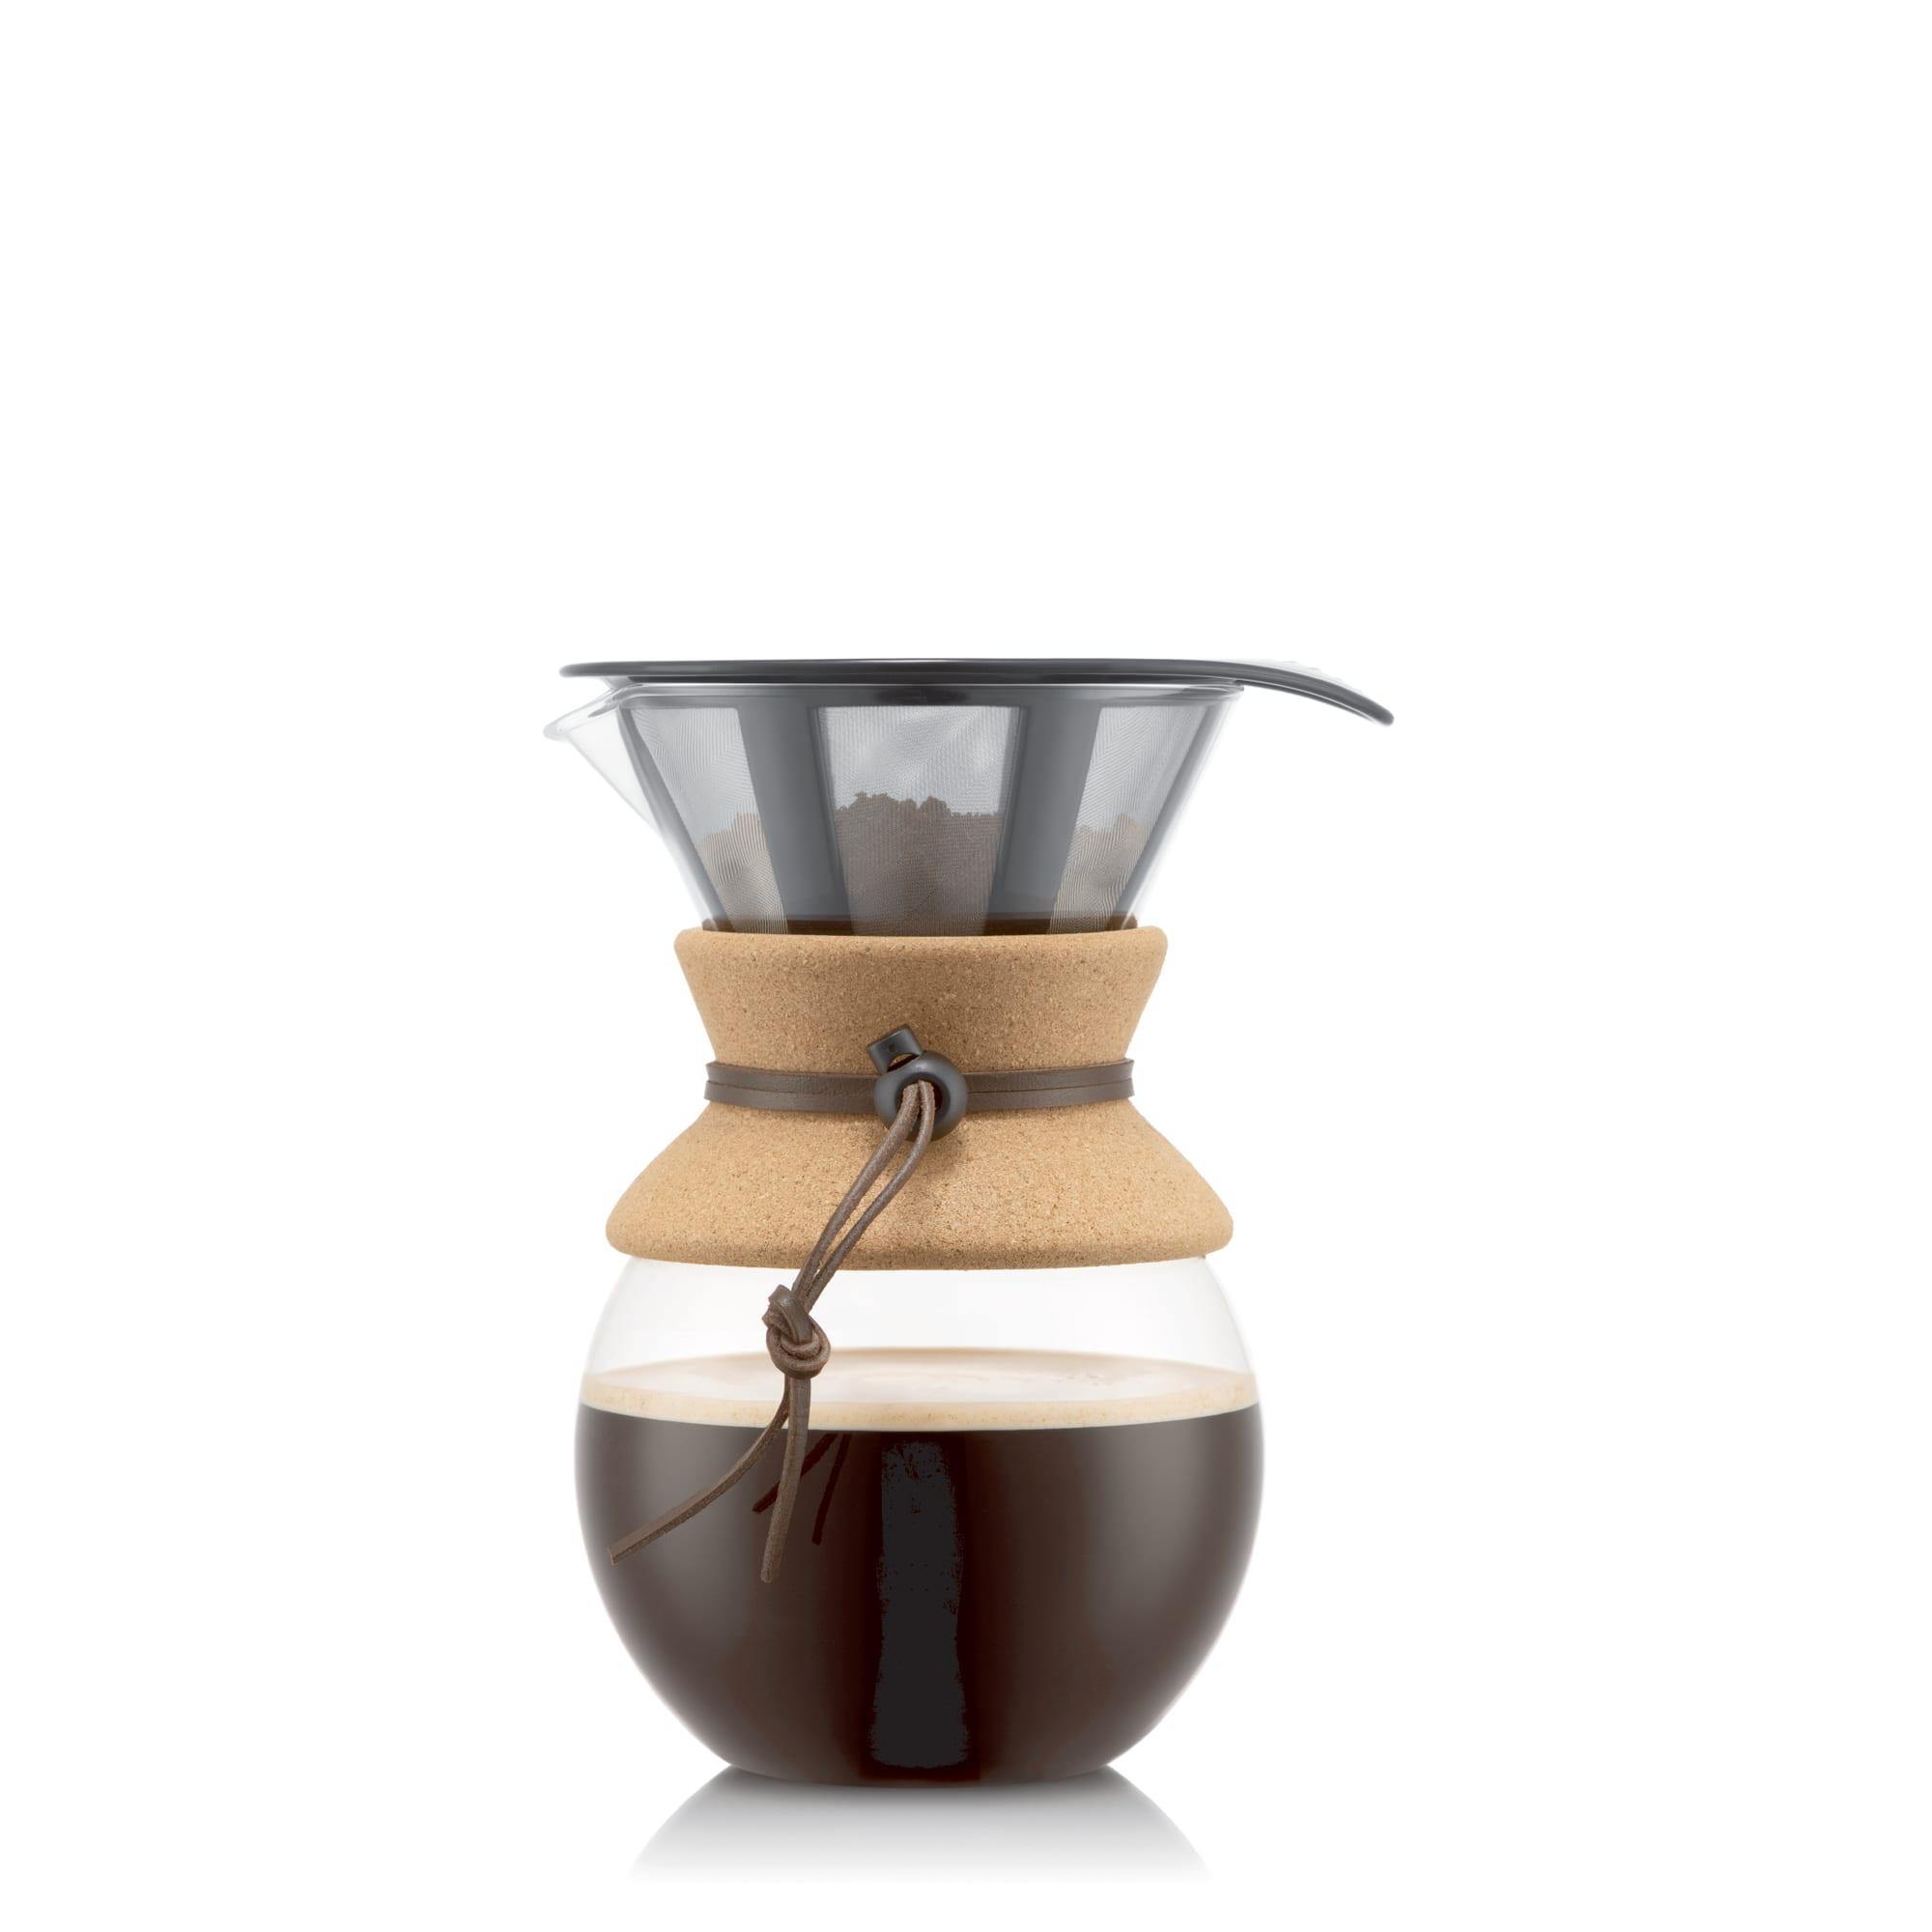 Bodum Pour Over Coffee Maker 8 Cup Image 4